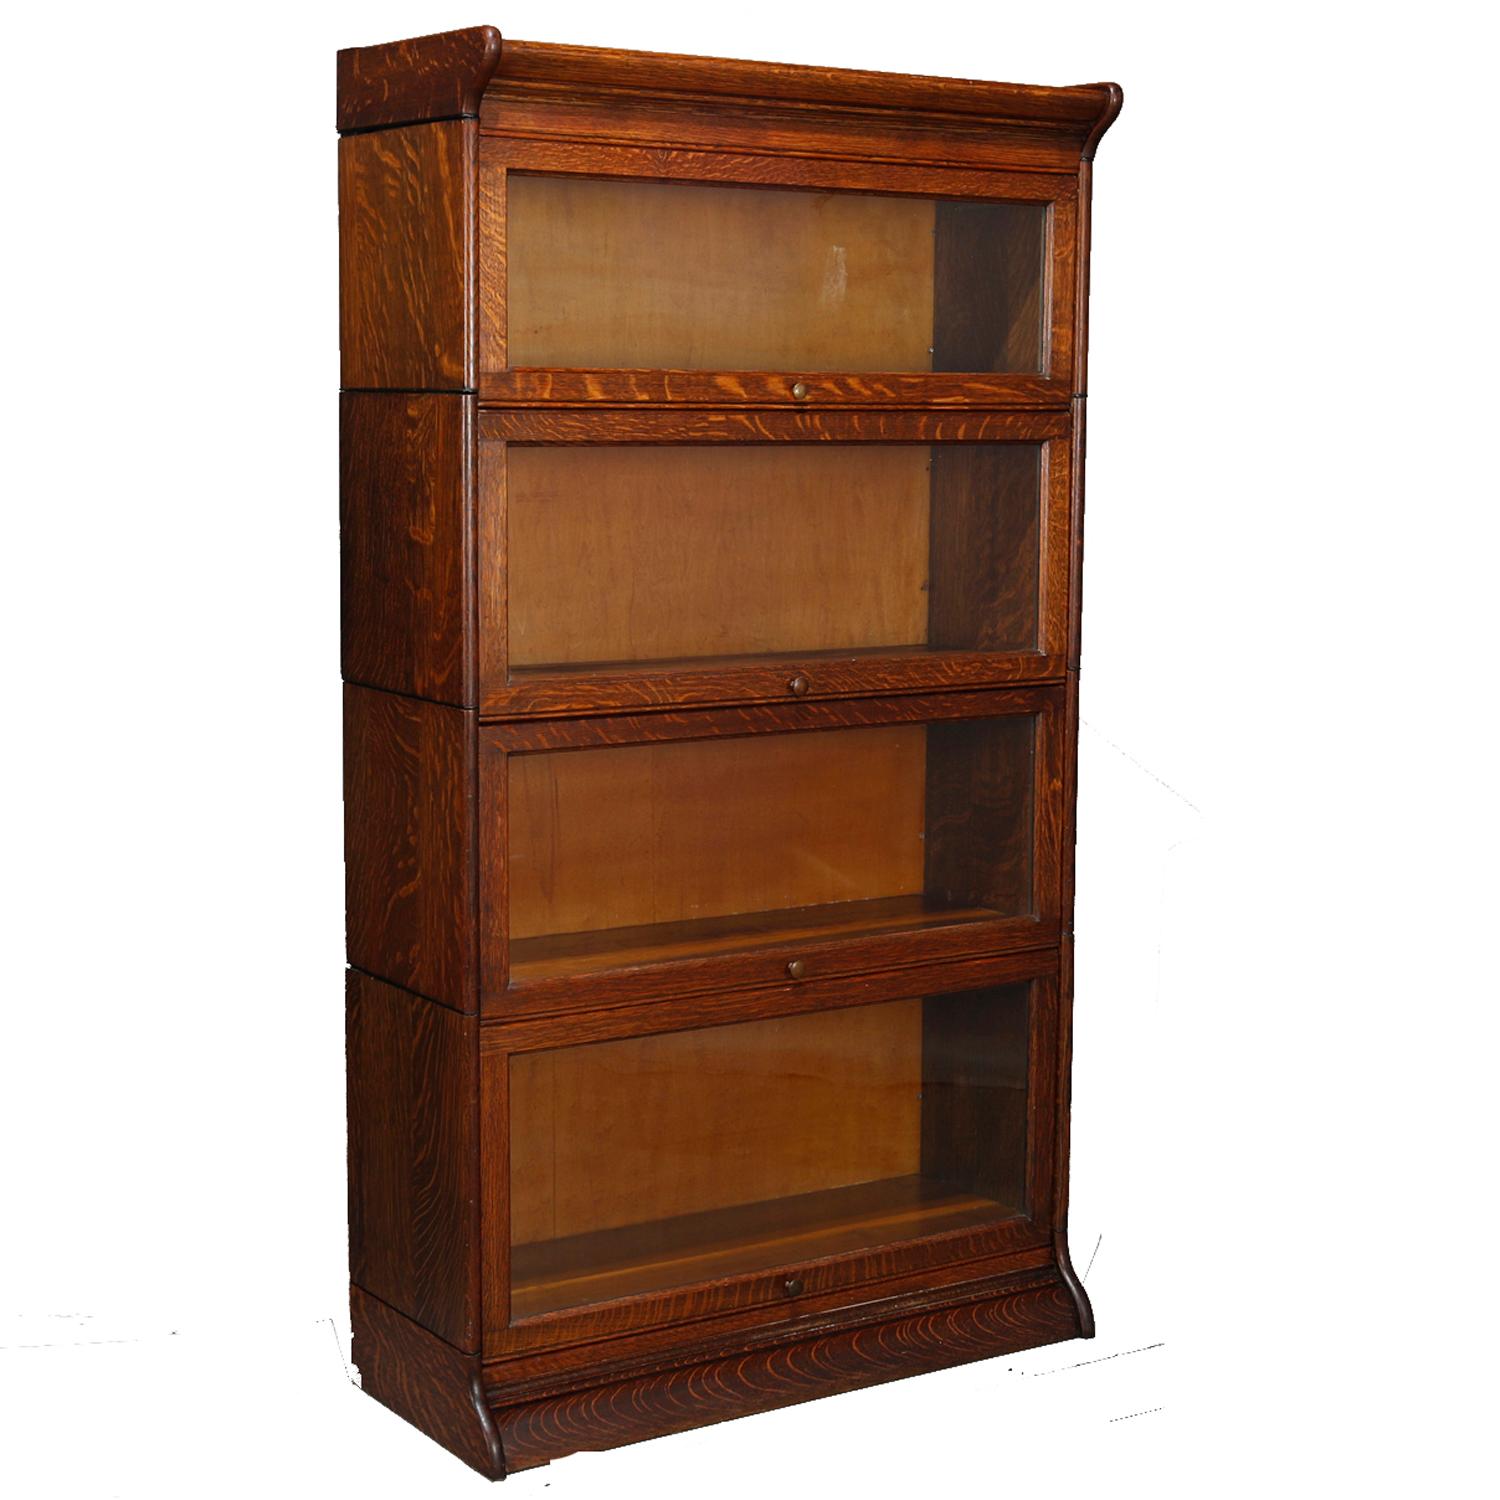 A matching pair of antique Arts & Crafts mission oak barrister bookcase offers quarter sawn oak construction each with four stacks, pull-out glass doors and original label as photographed, circa 1920

Measures - 61.5